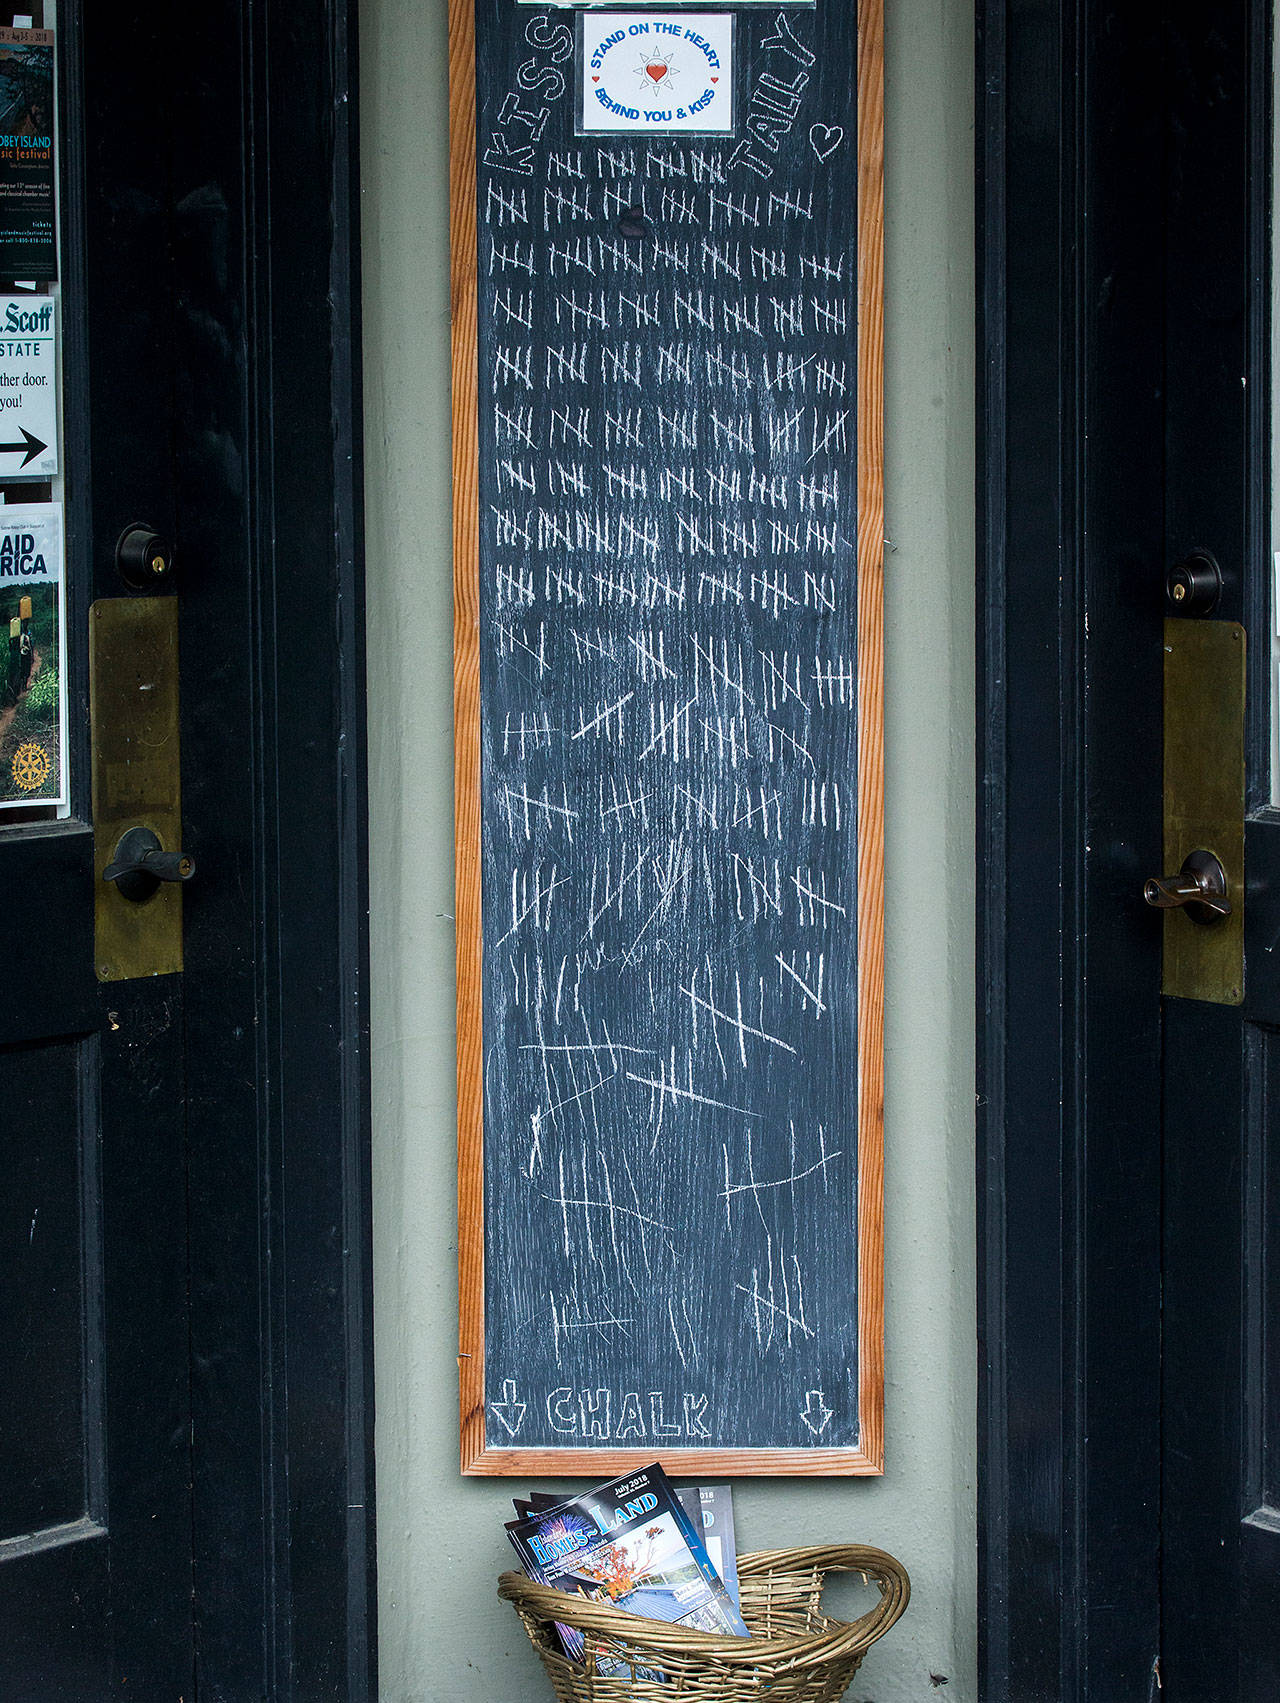 Tally marks get longer and messier the further down a chalkboard in front of the John Scott Real Estate office on First Street in Langley. Visitors to Langley can stand on the sidewalk on the heart and kiss, then make a hashmark on the chalkboard. The office keeps a tally and posts the monthly and yearly count. (Andy Bronson / The Herald)